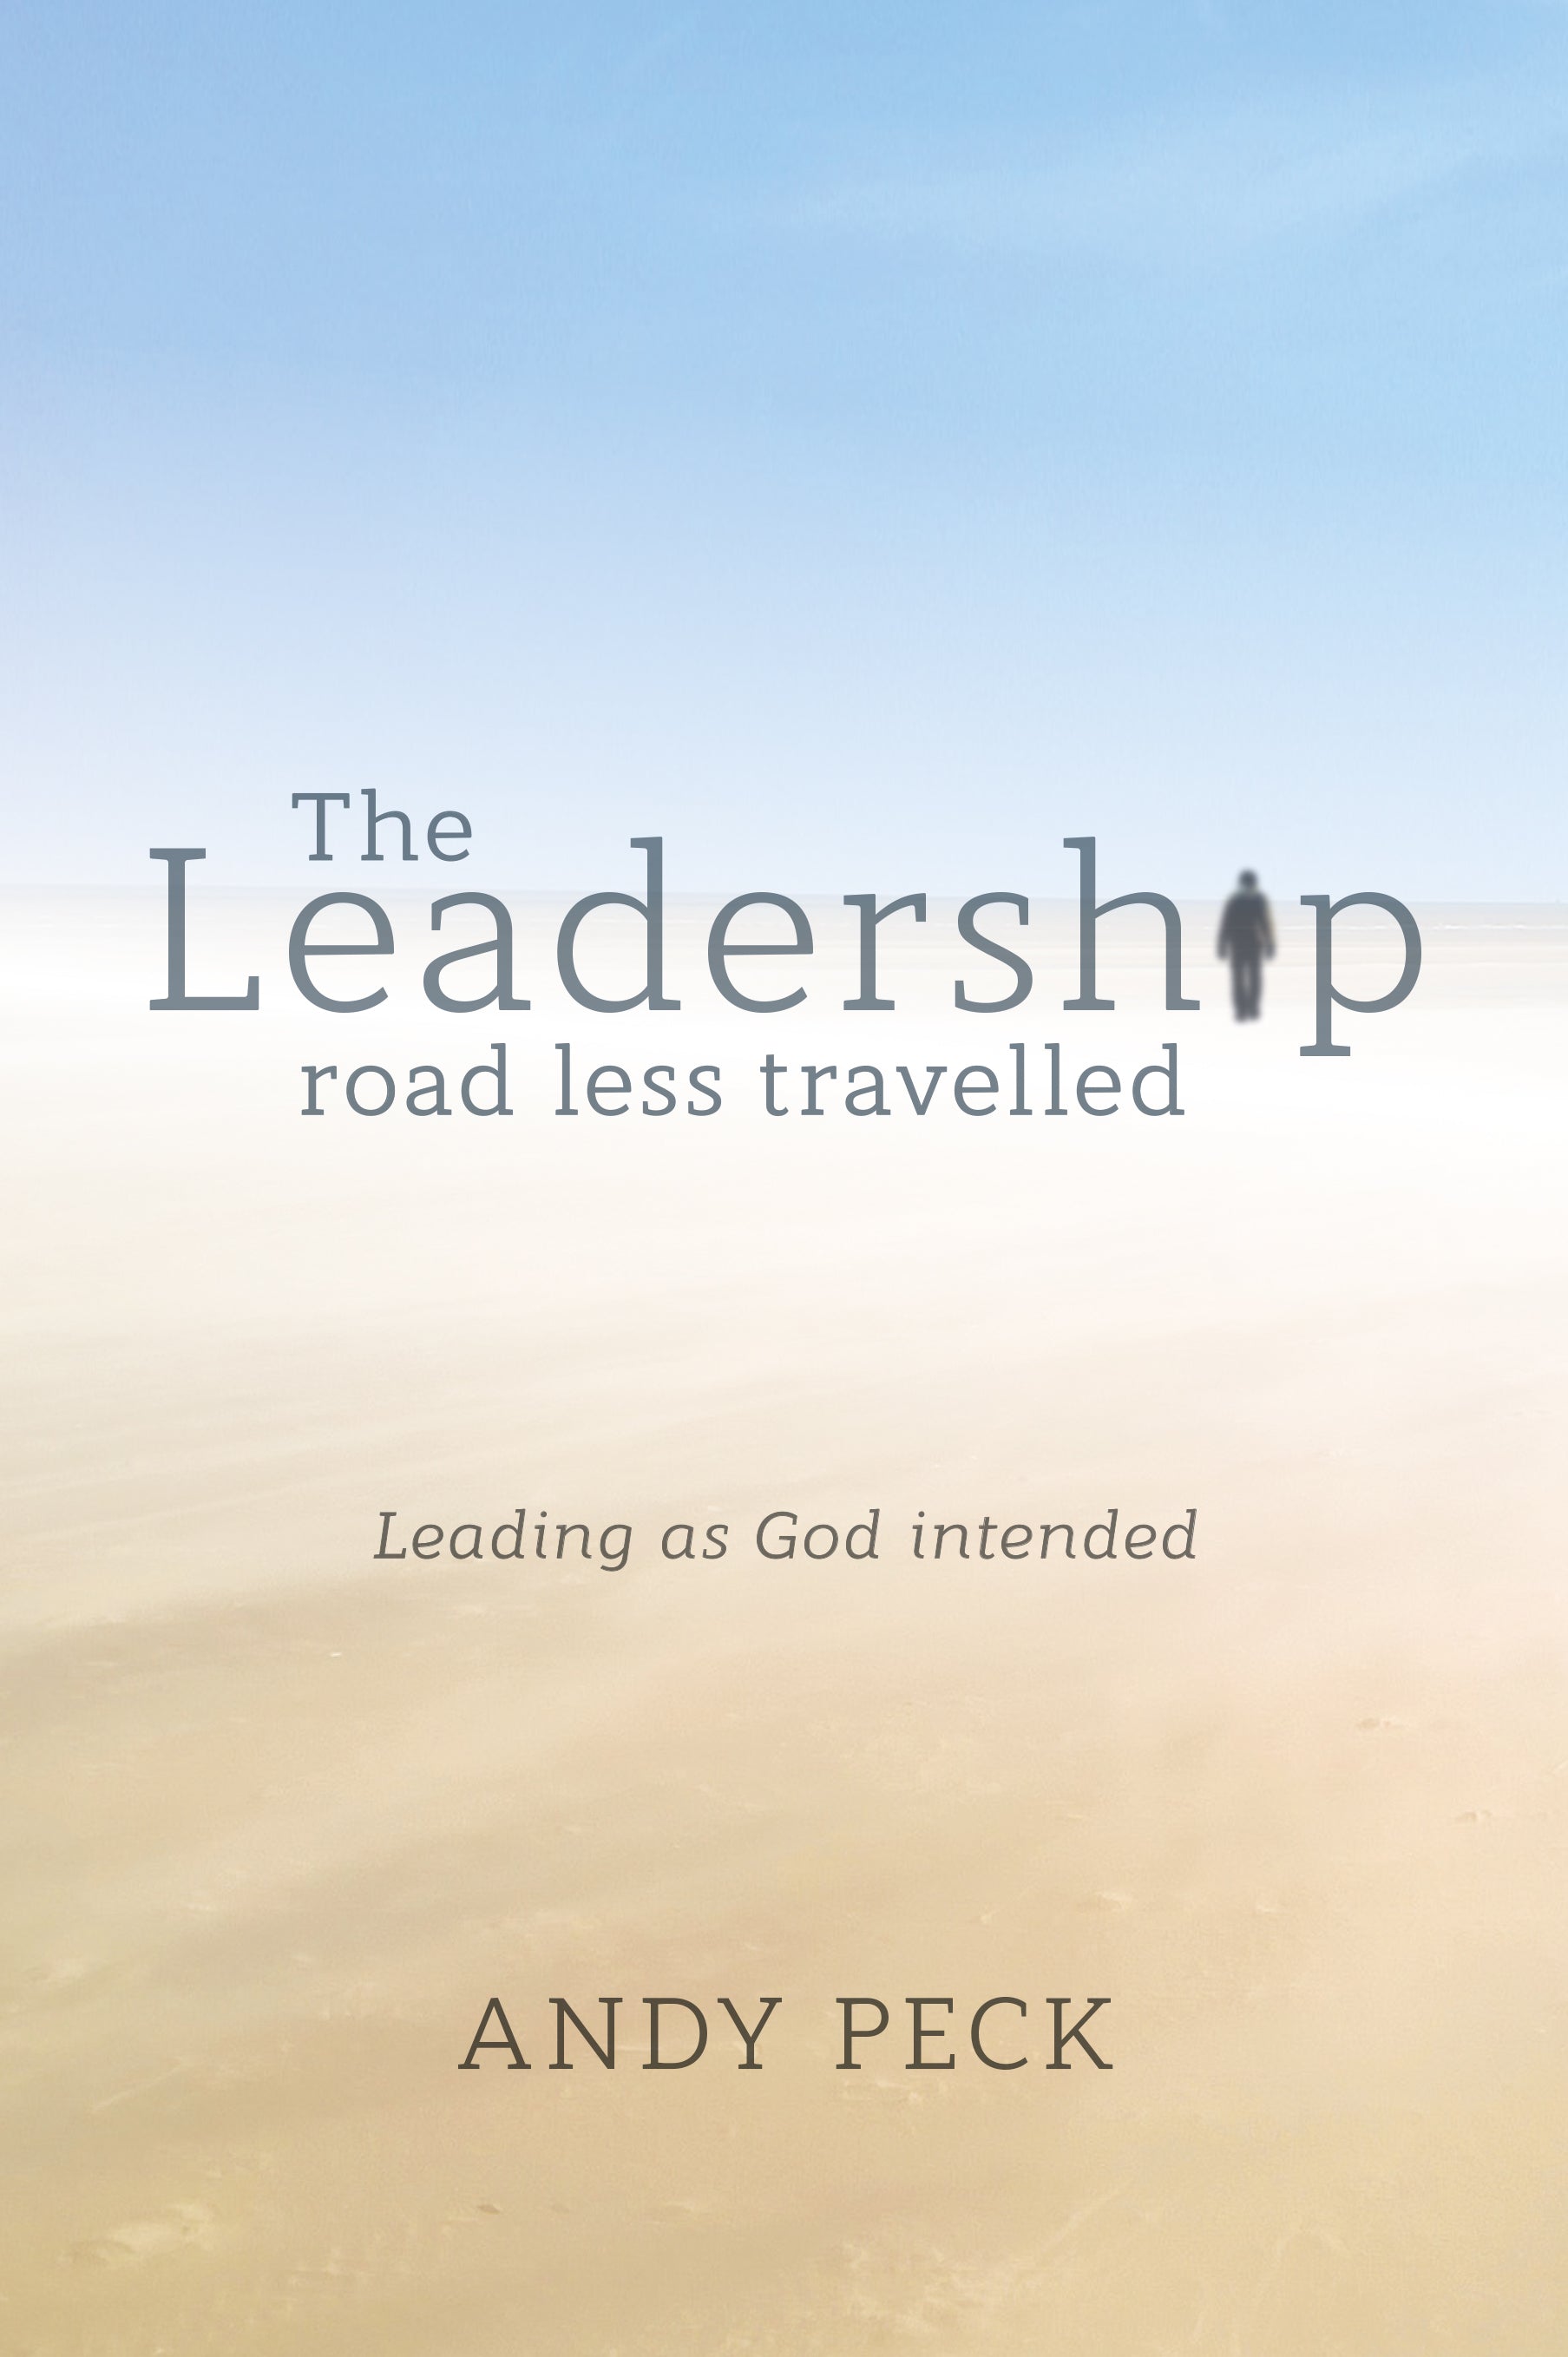 Image of The Leadership Road Less Travelled other